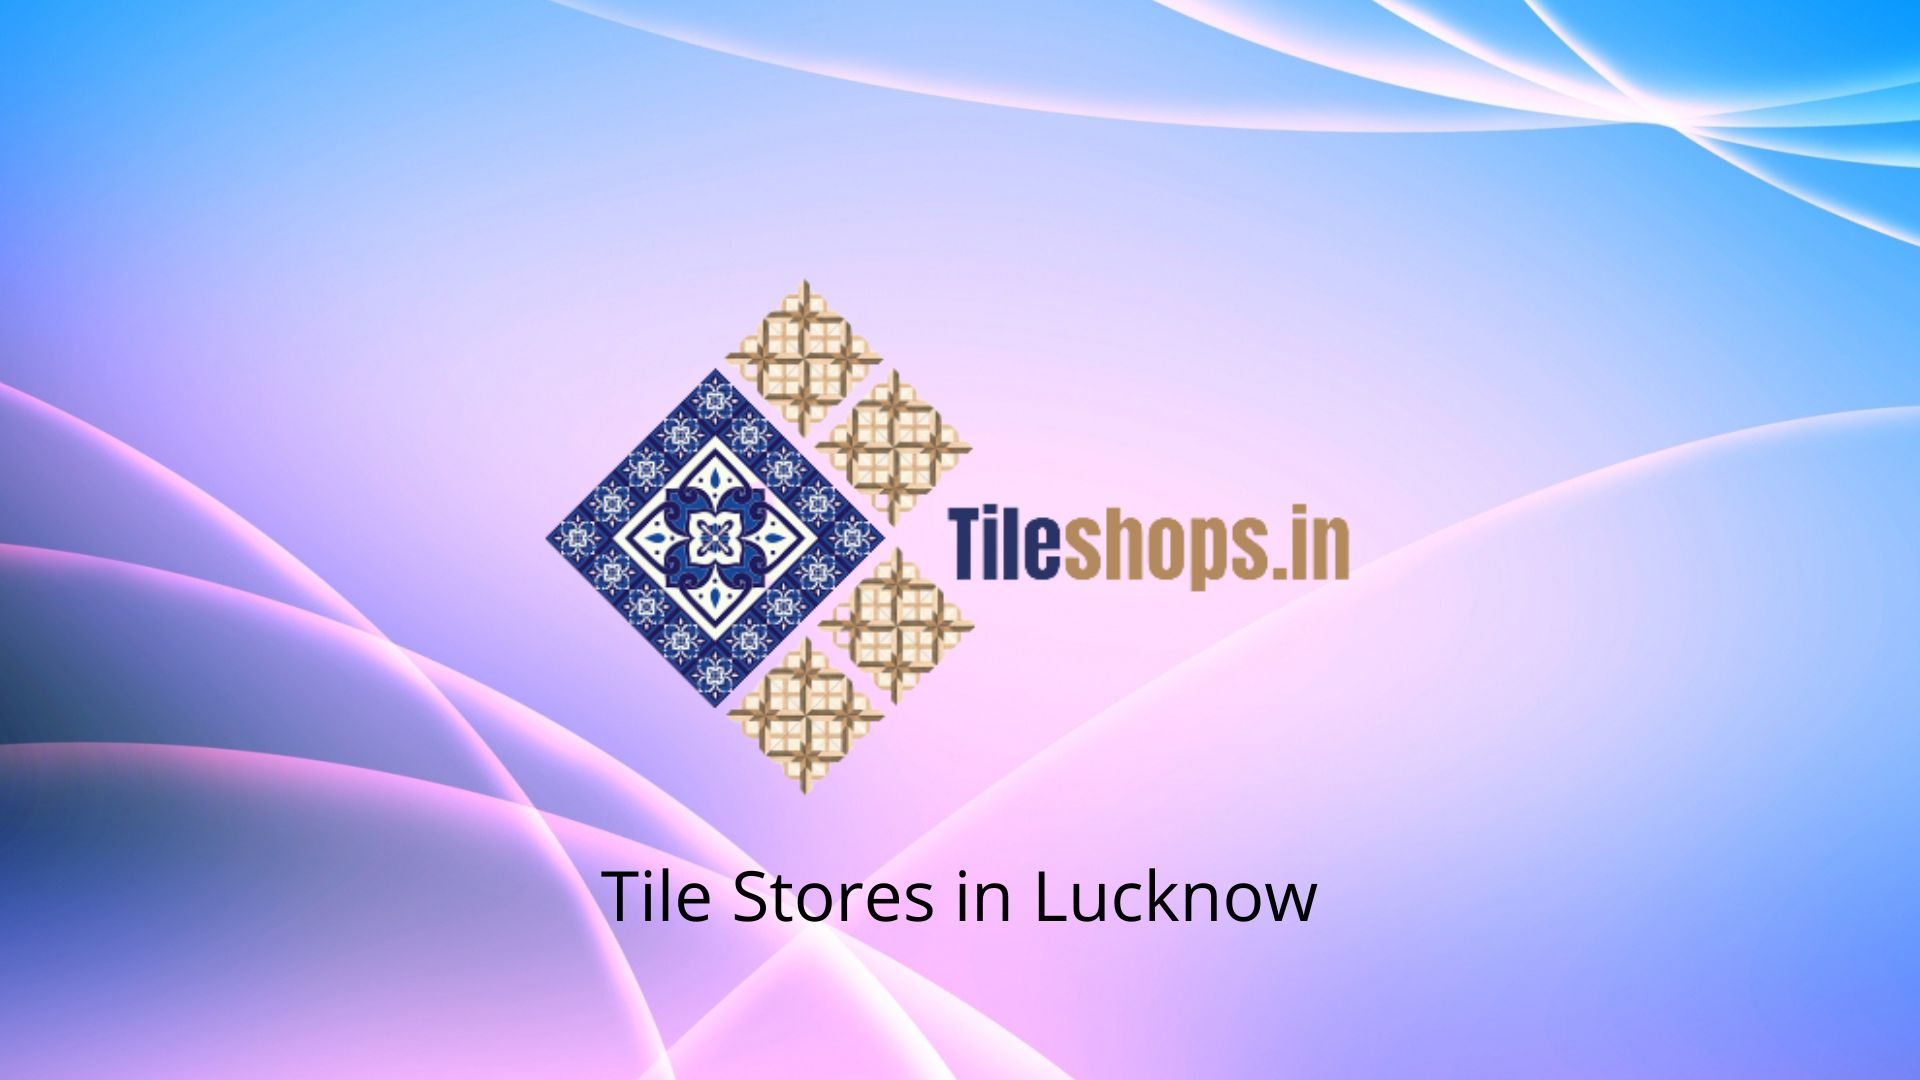 Tile Stores in Lucknow